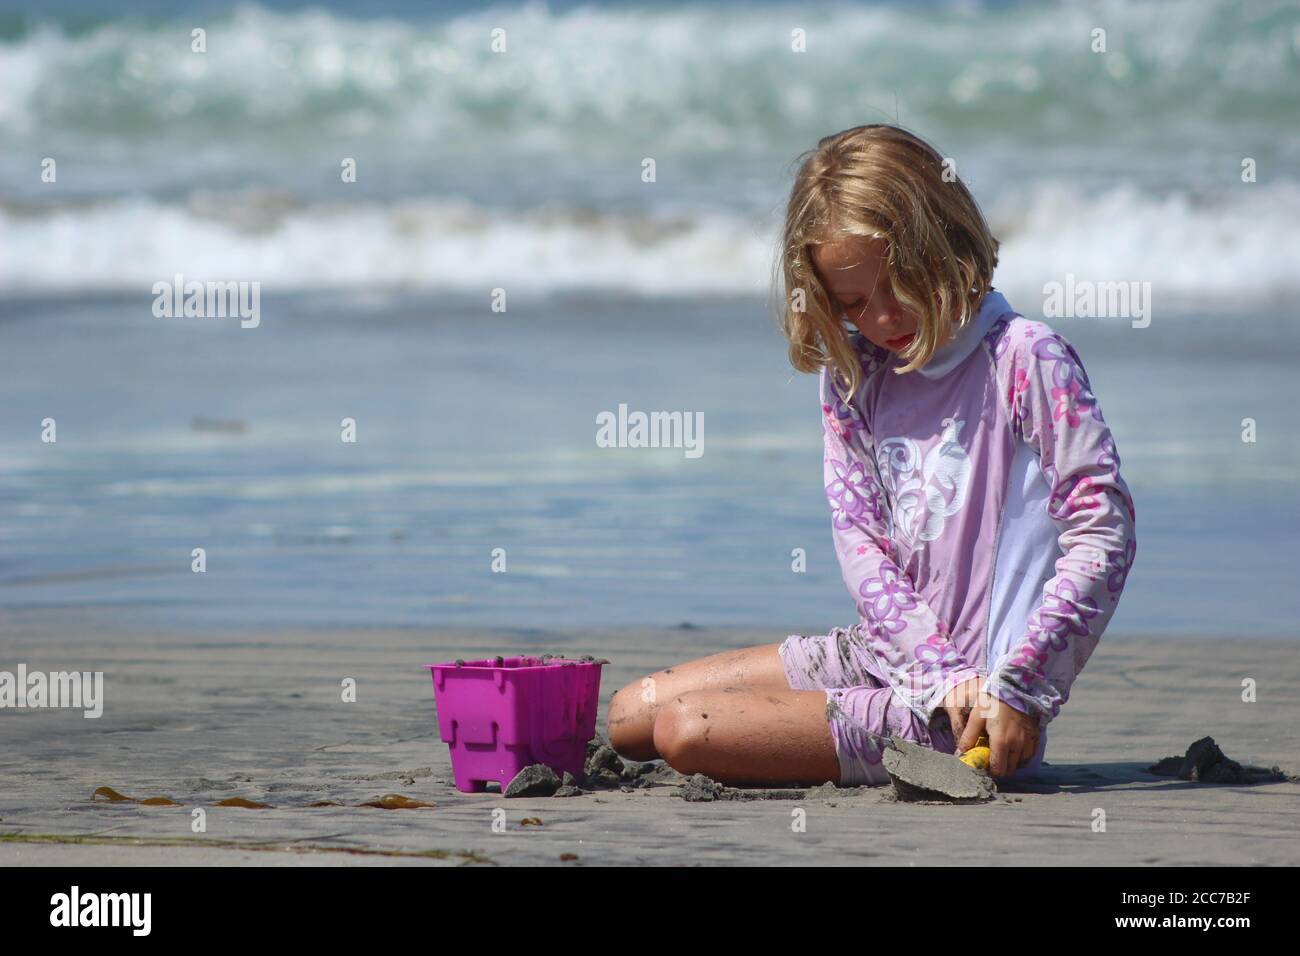 A young blond girl plays with sand toys at the beach Stock Photo